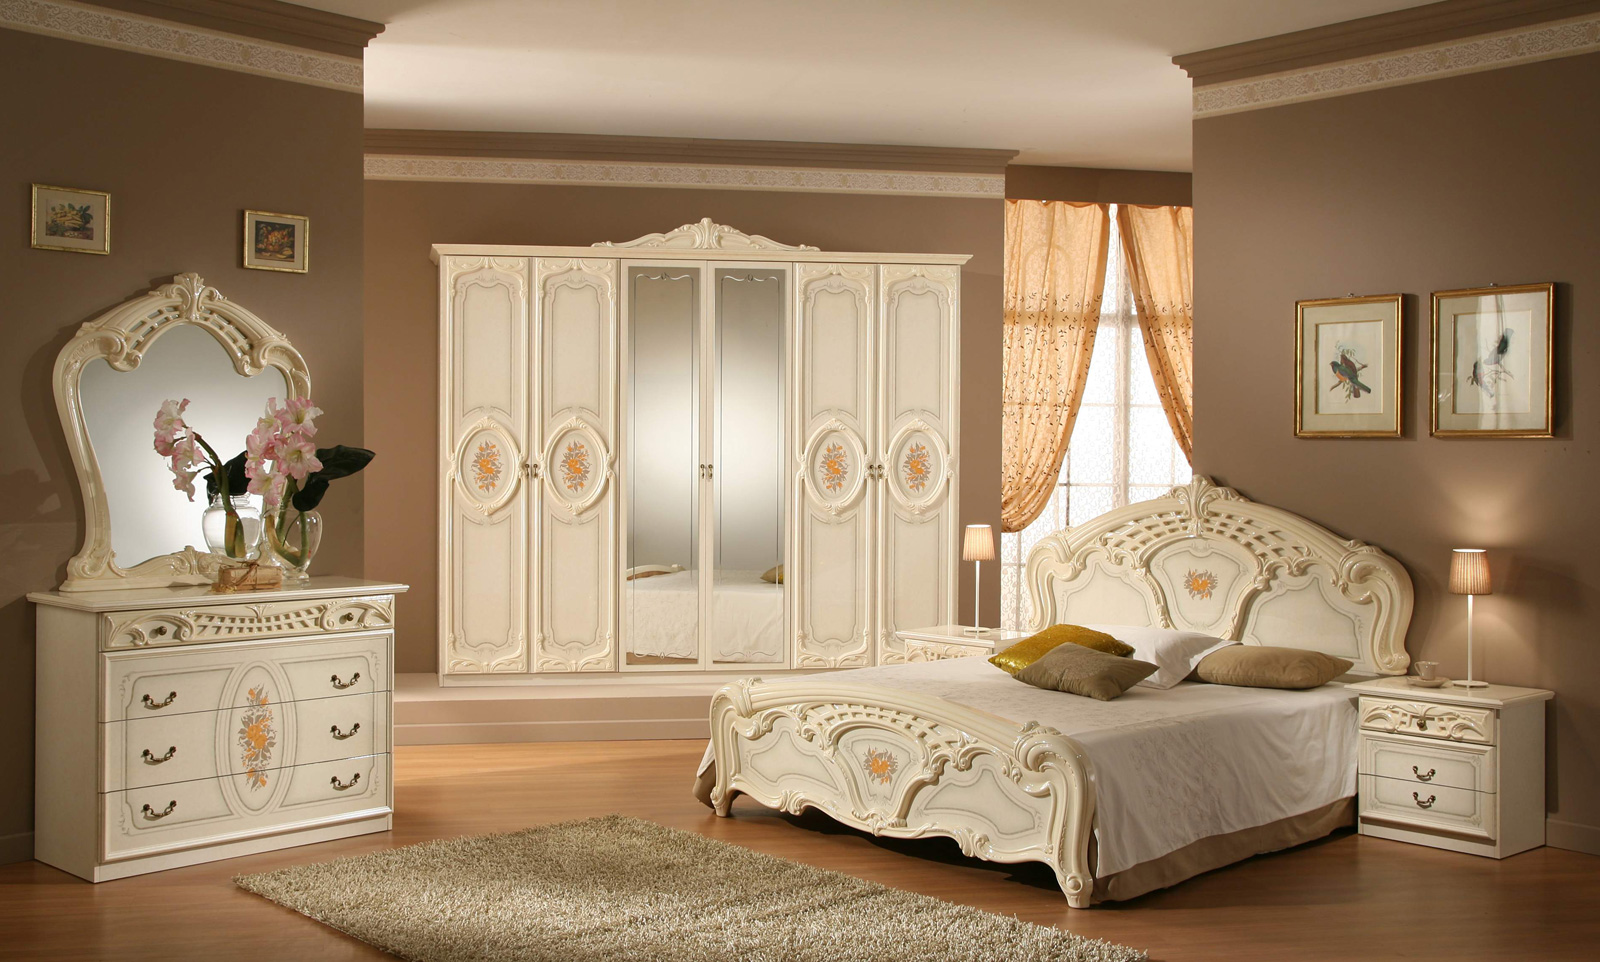 Bedroom Furniture Simple Charming Bedroom Furniture Sets And Simple Bedroom Queen Design With White Wooden Bedroom Furniture Ideas Also Exciting Carved Mirror Bedroom Decorating Ideas Furniture Best Bedroom Furniture Sets To Browse Through For Inspiration